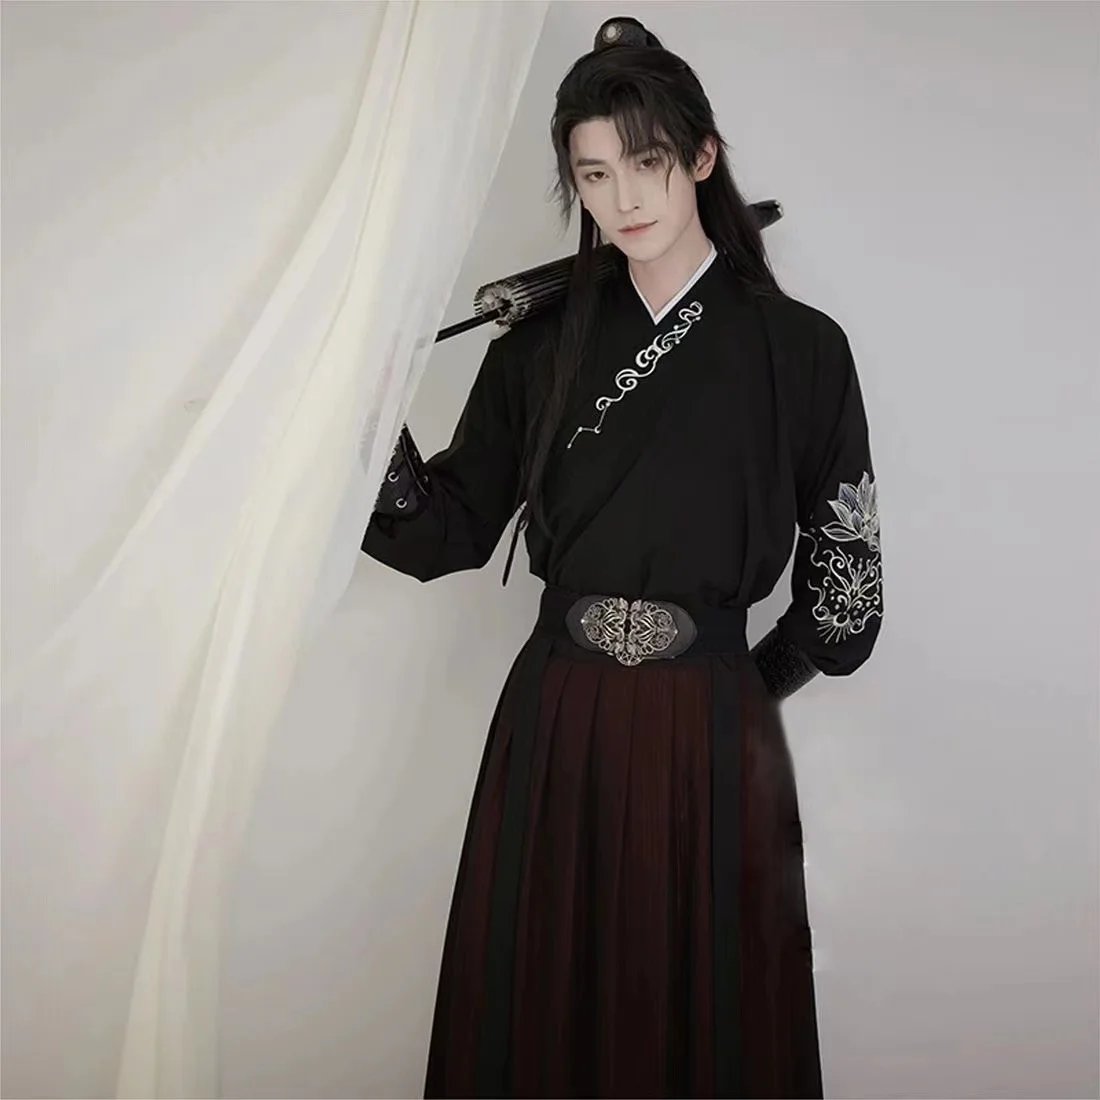 Chinese Style Hanfu Men Ancient Black Costume Hanfu Dress for Boys Girls Young Men Women Photography Cosplay Party Show Clothing black shoulderless maternity dresses for photo shoot tulle patchwork pregnancy photography gown pregnant women baby shower dress